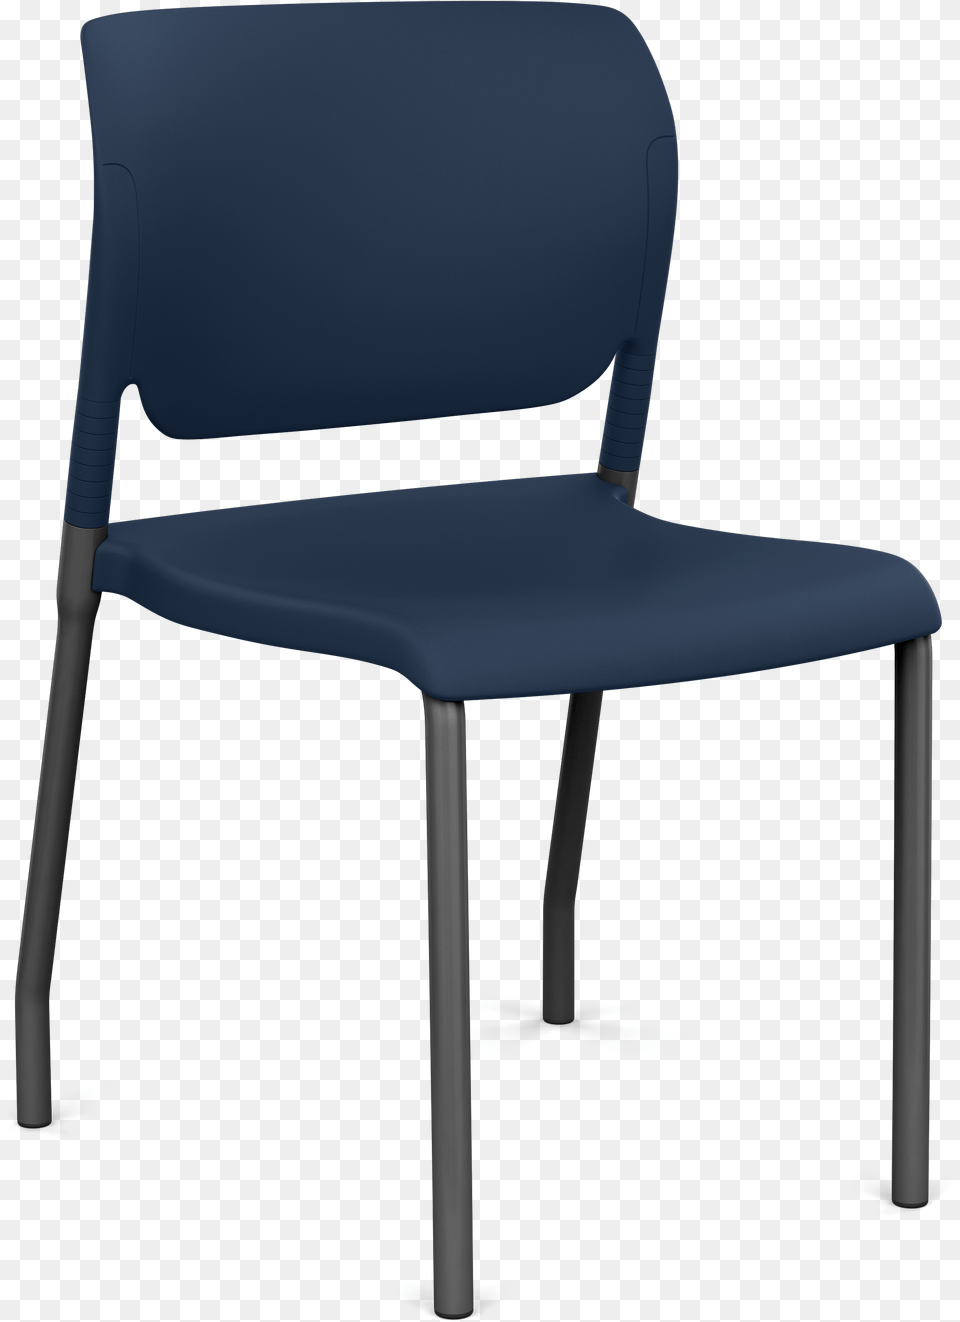 Inflex Plastic Side Chair Armless Chair, Furniture, Armchair Free Png